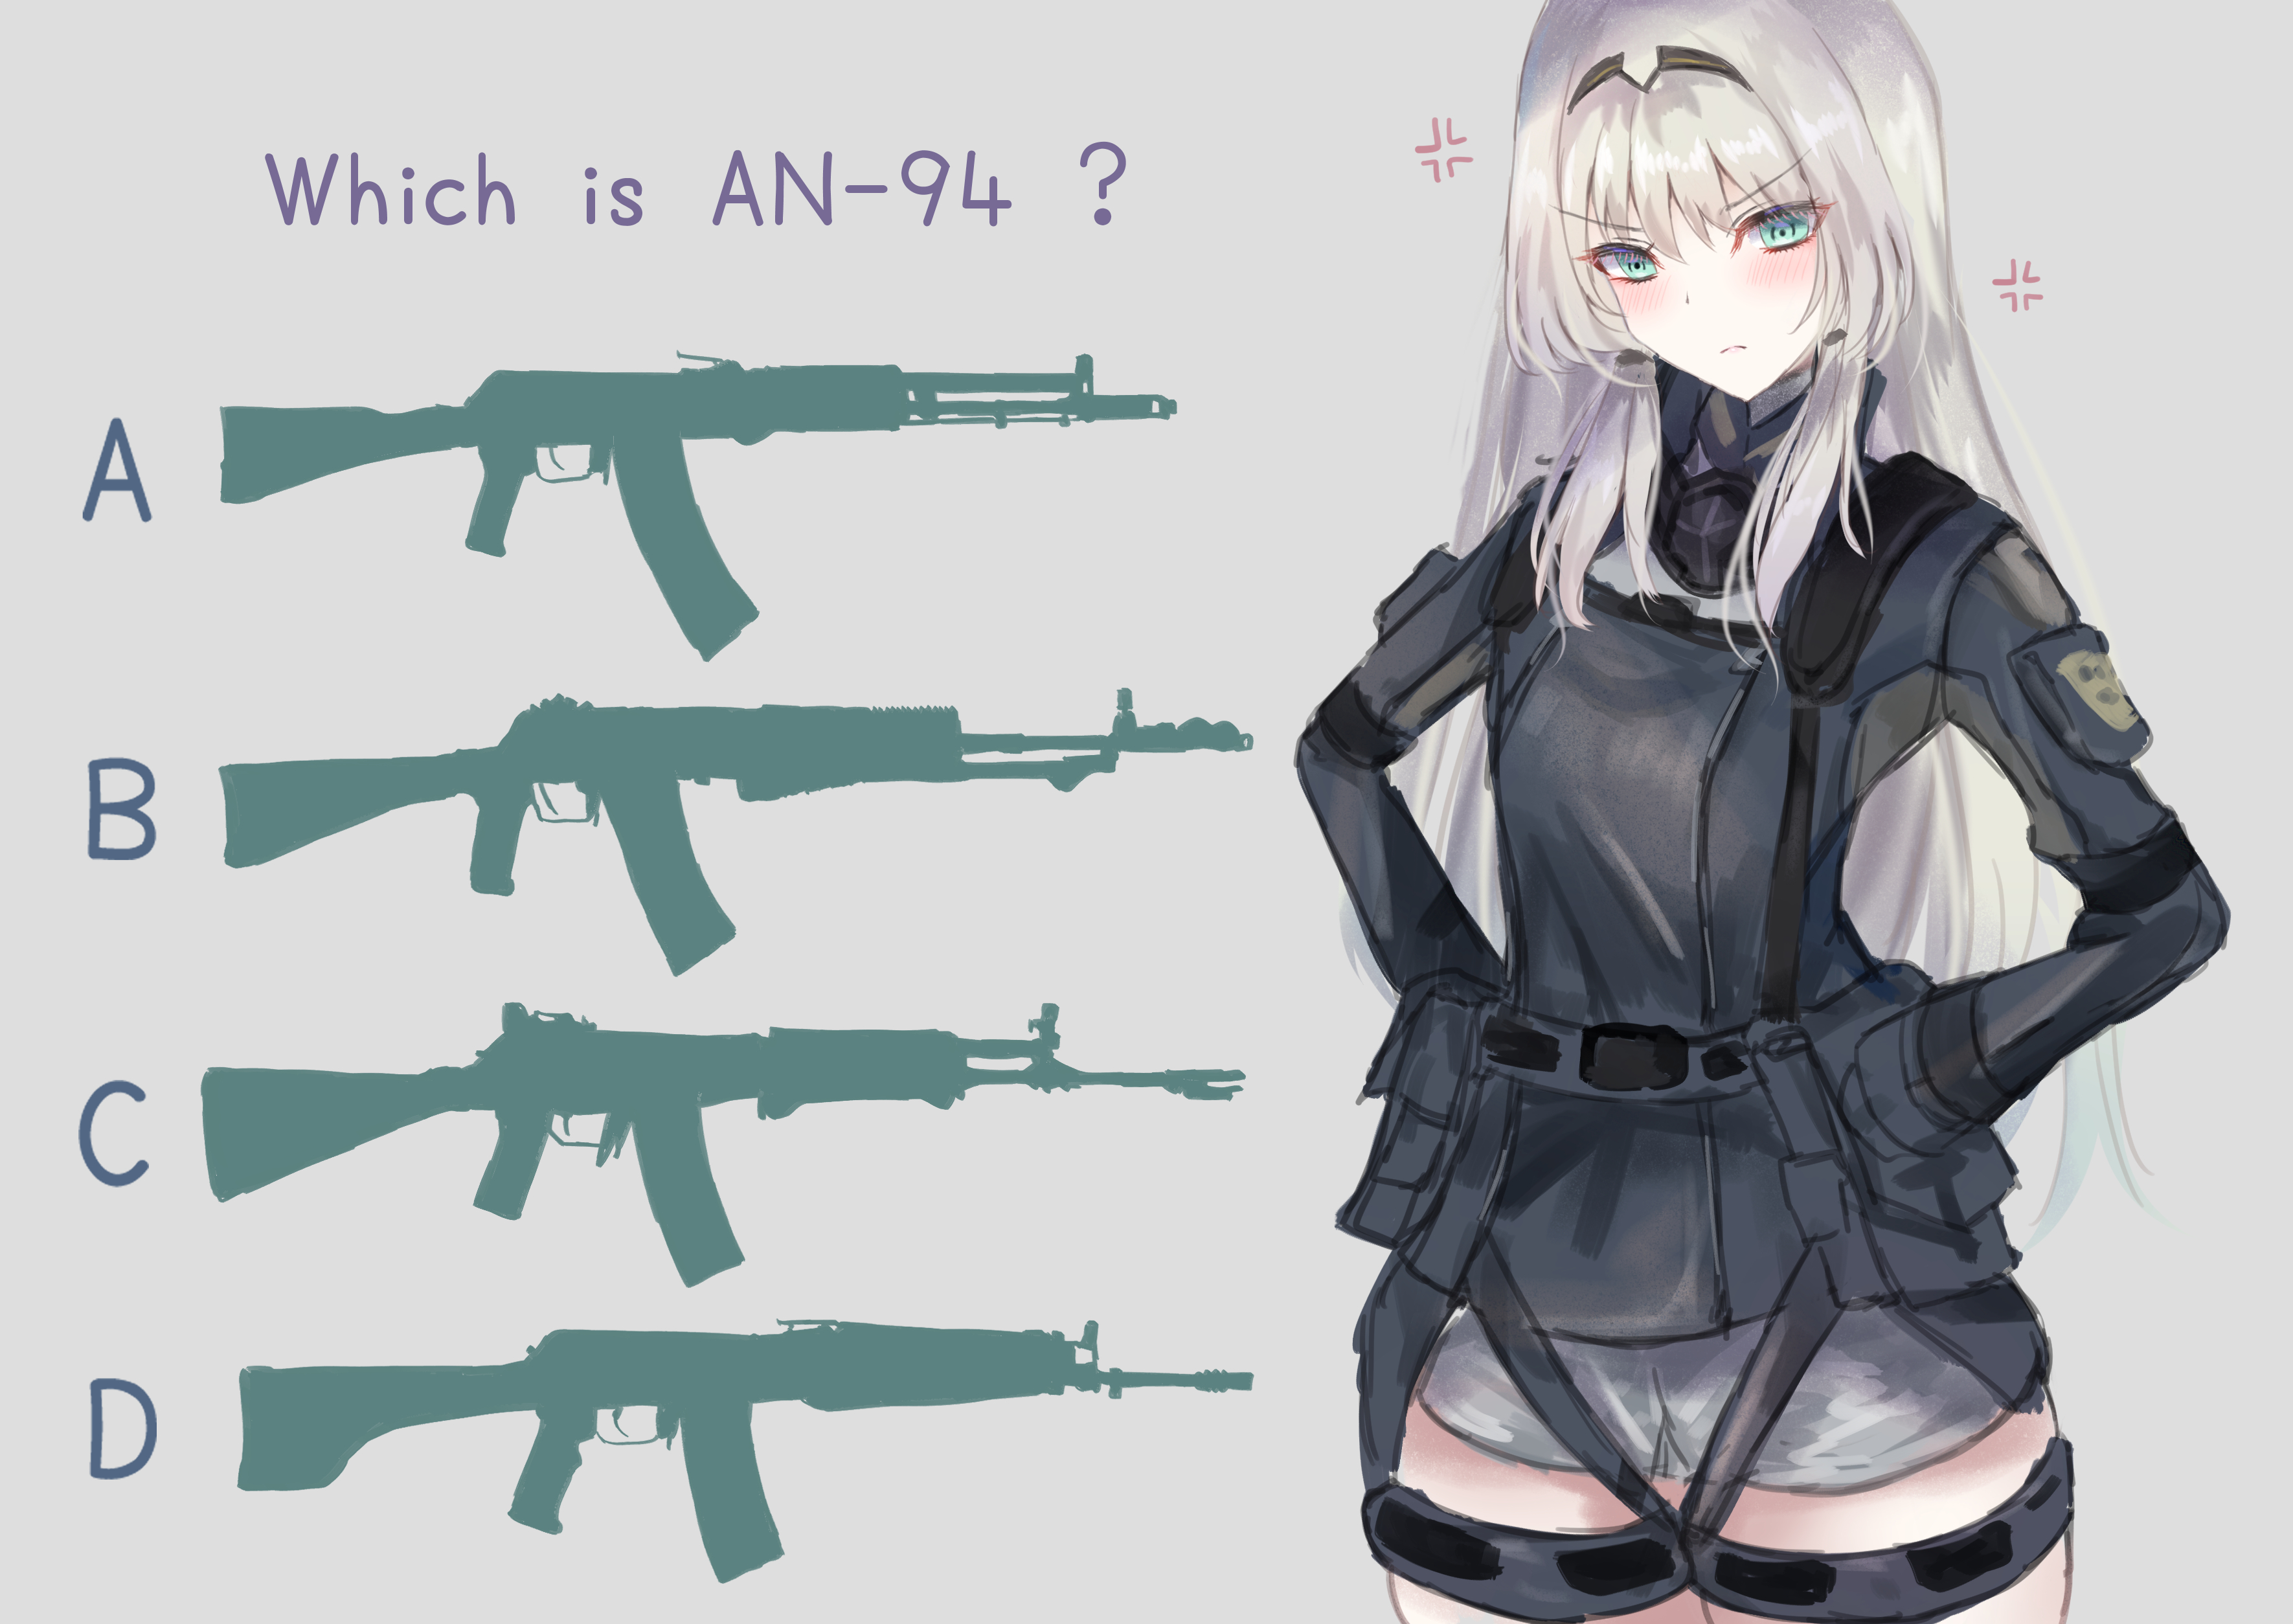 Which is AN-94 ?